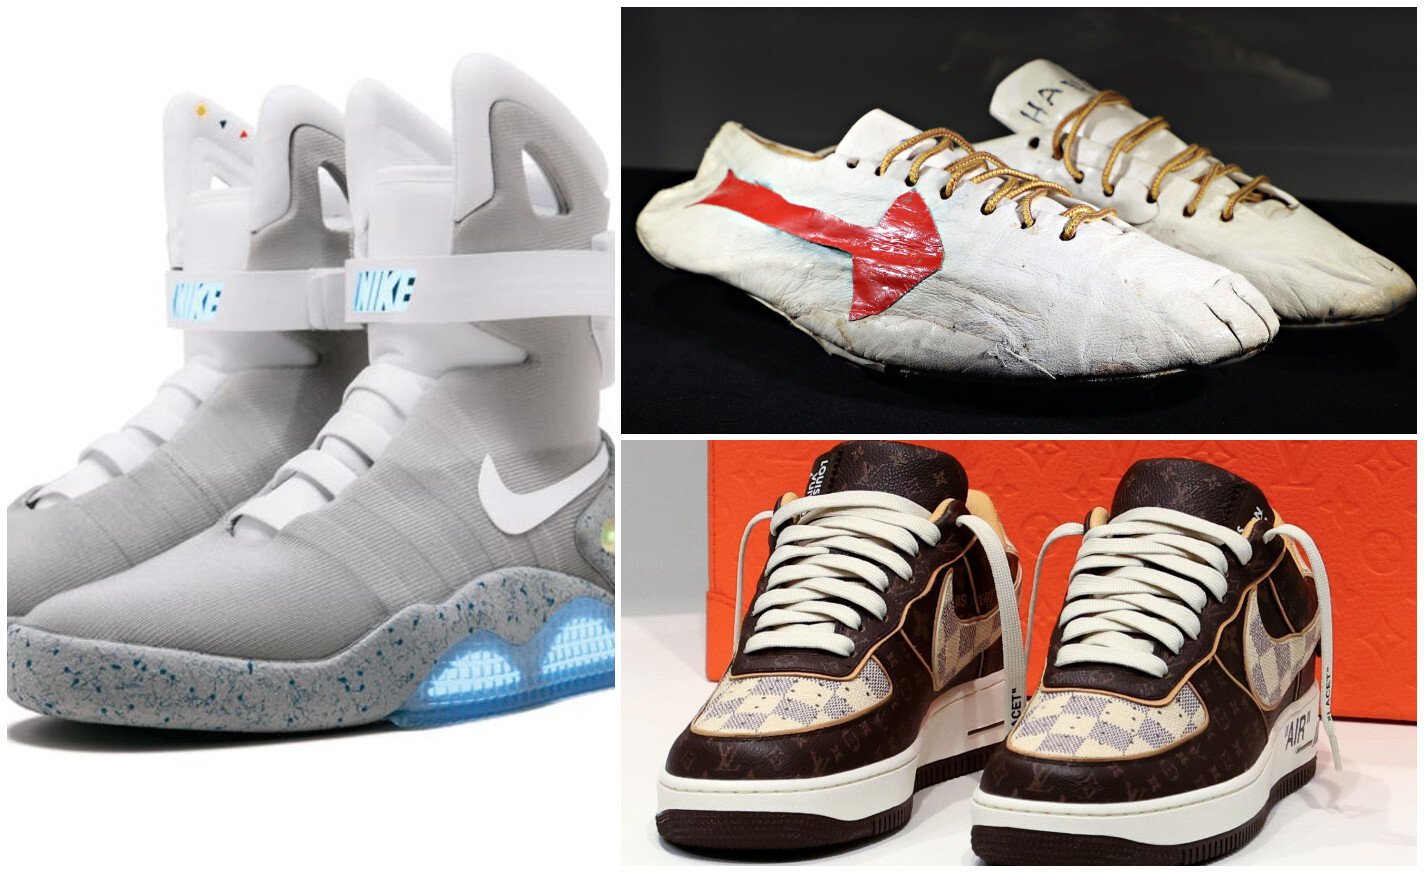 Whether they’re brand new or worn in by famous celebrities, these are 11 of the most expensive pairs of sneakers ever sold. Photos: Handout/Getty Images